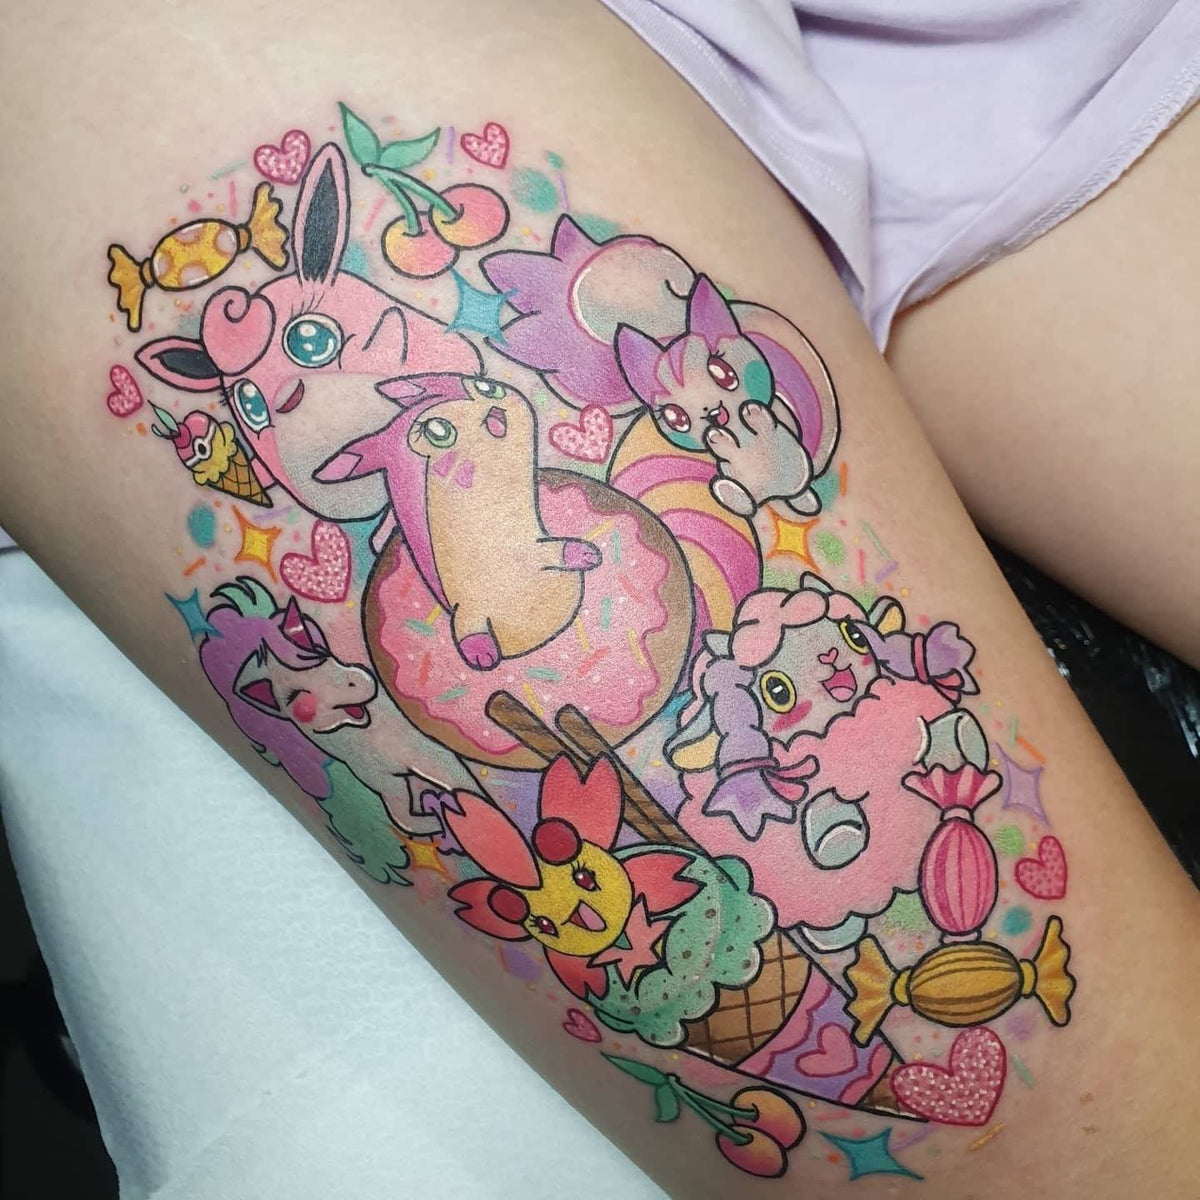 Main image: Tattoo by Pixie Robson